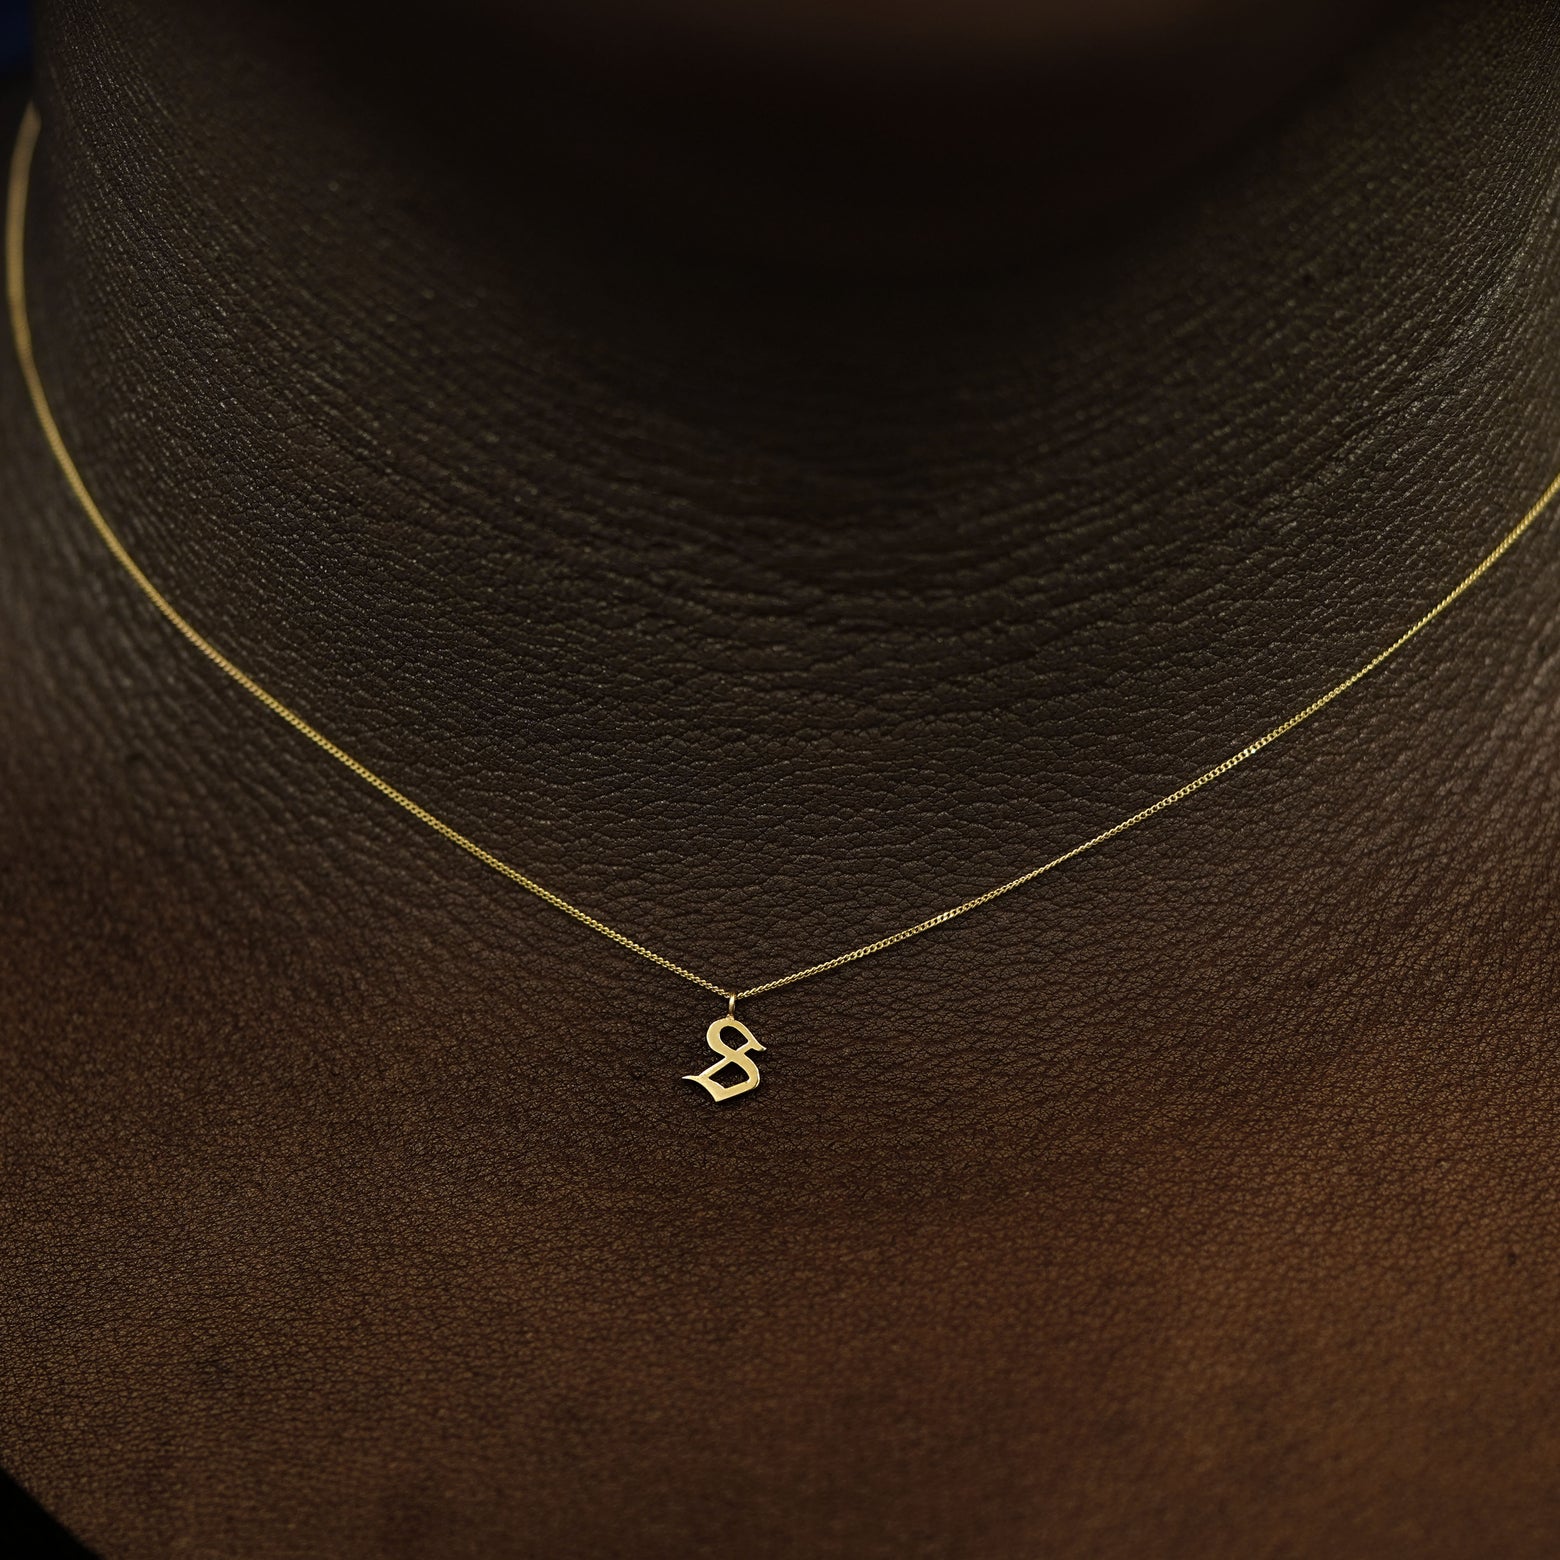 A model's neck wearing a 14k solid yellow gold Initial Charm Necklace in the letter S